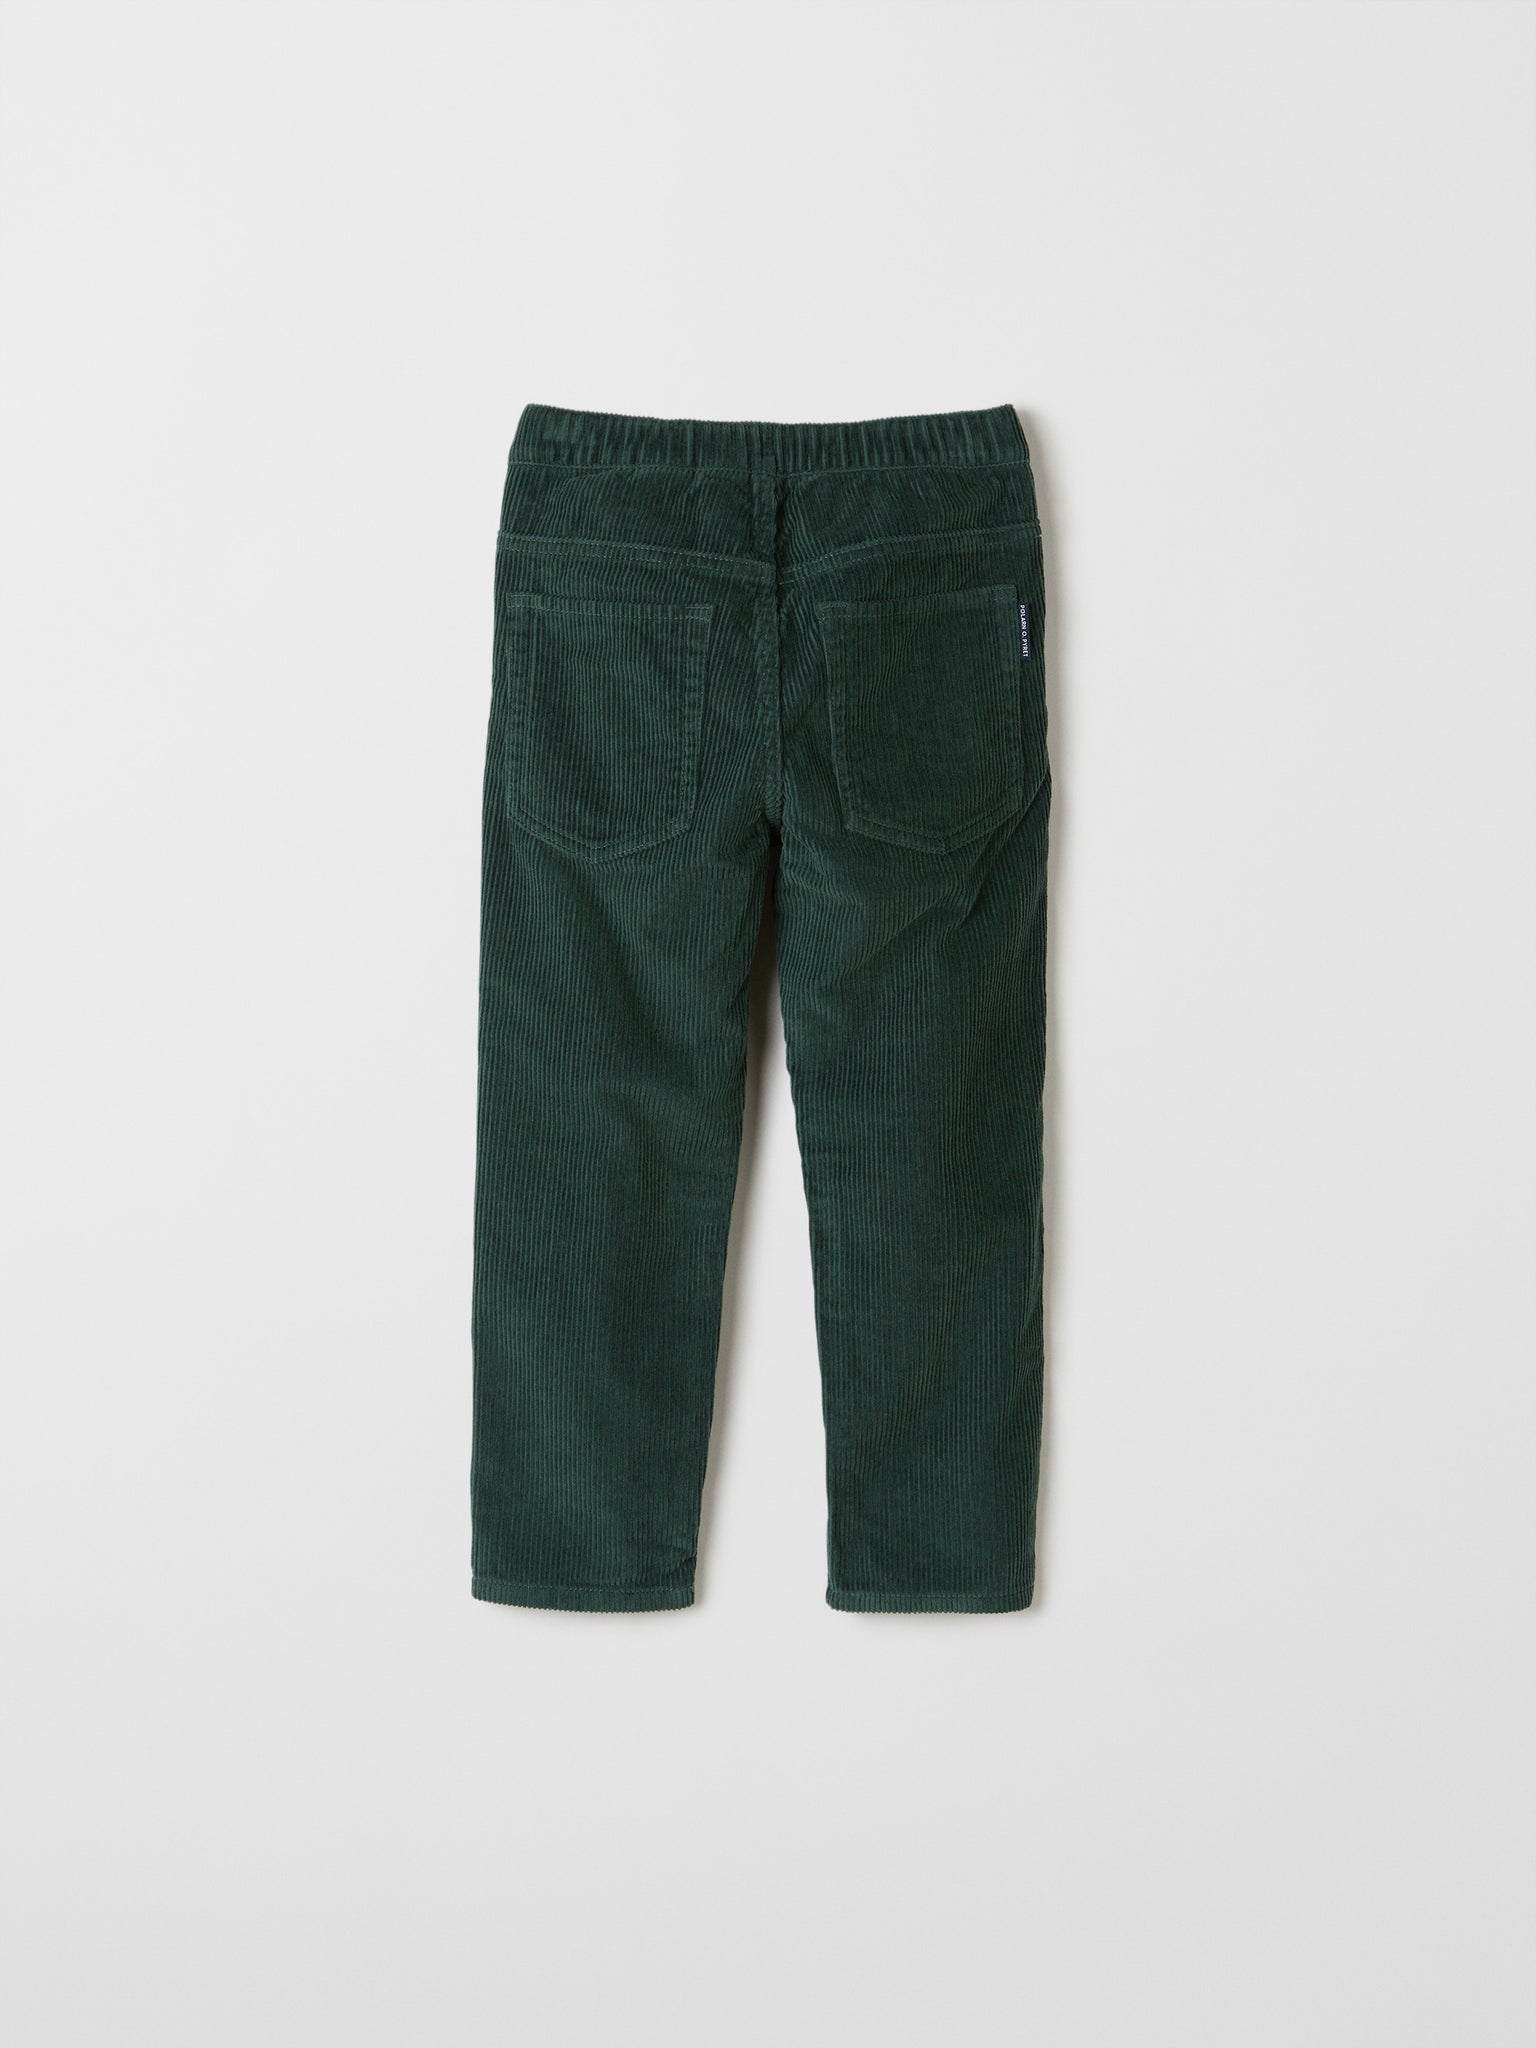 Cotton Kids Green Corduroy Trousers from the Polarn O. Pyret kids collection. Made using 100% GOTS Organic Cotton